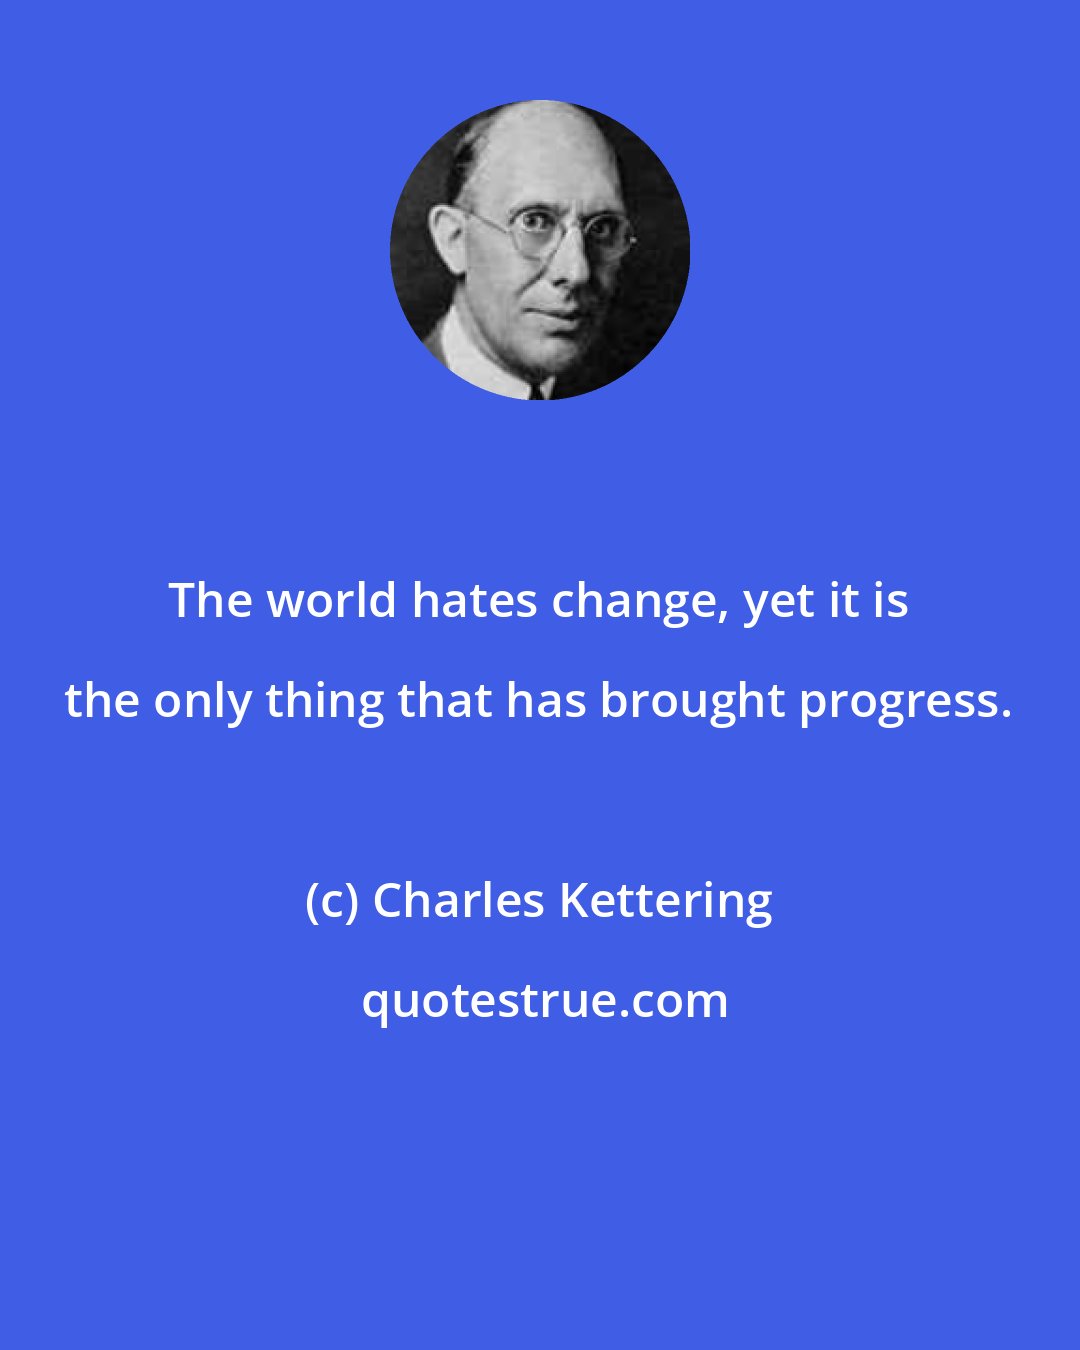 Charles Kettering: The world hates change, yet it is the only thing that has brought progress.